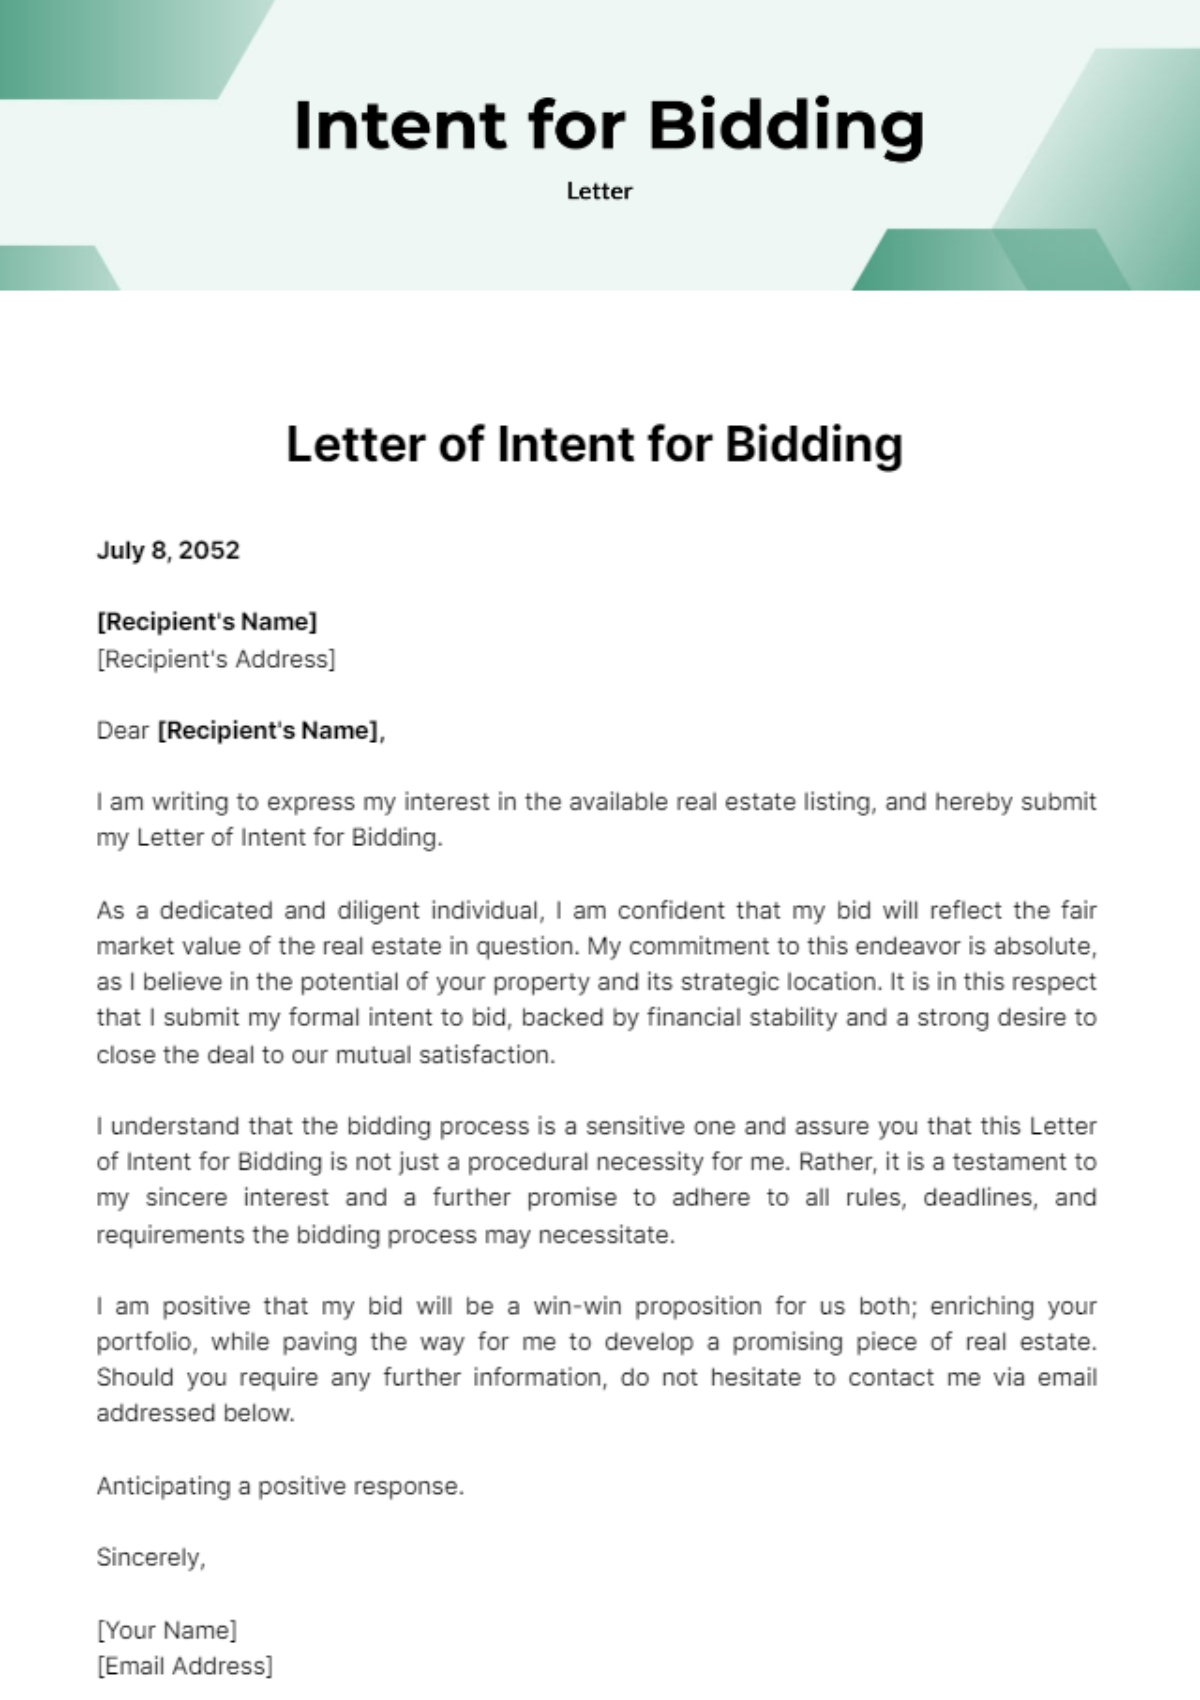 Letter of Intent for Bidding Template